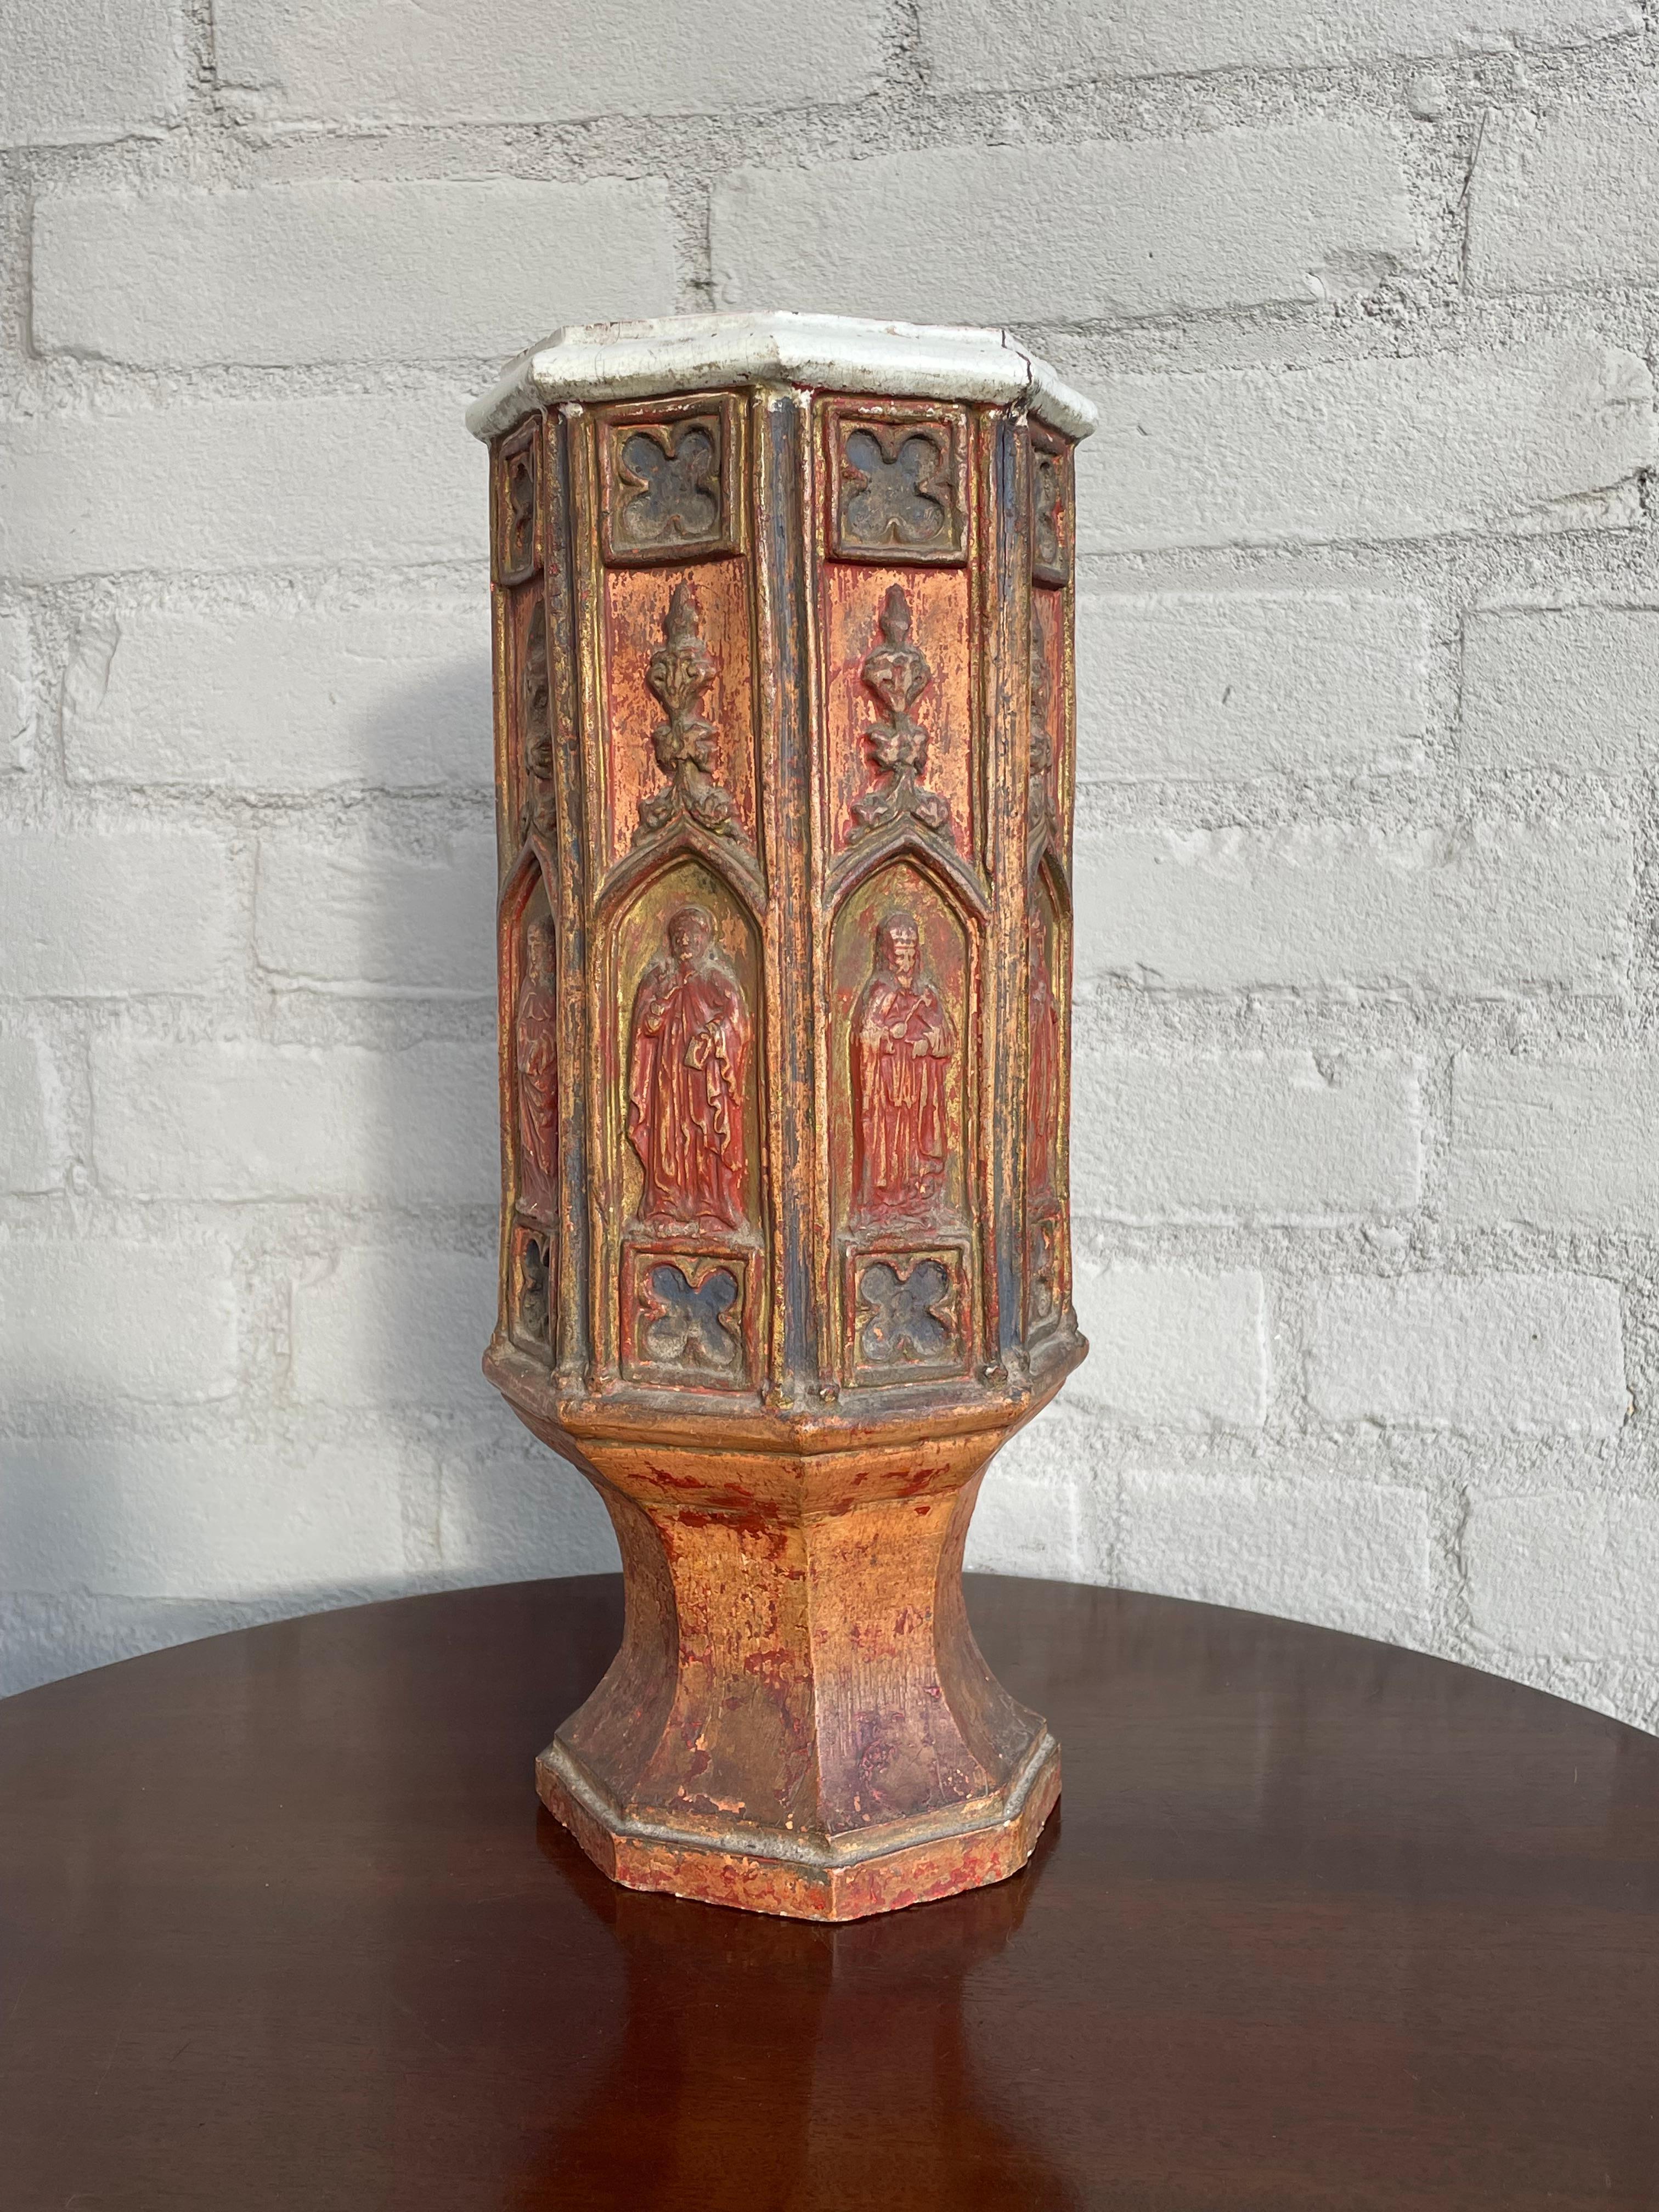 Amazing workmanship and truly ancient looking, Medieval style antique Sanctuary vase.

This great looking and all handcrafted Gothic Revival vase is the first one of its kind that we have ever seen. Since we cannot find another one anywhere in the